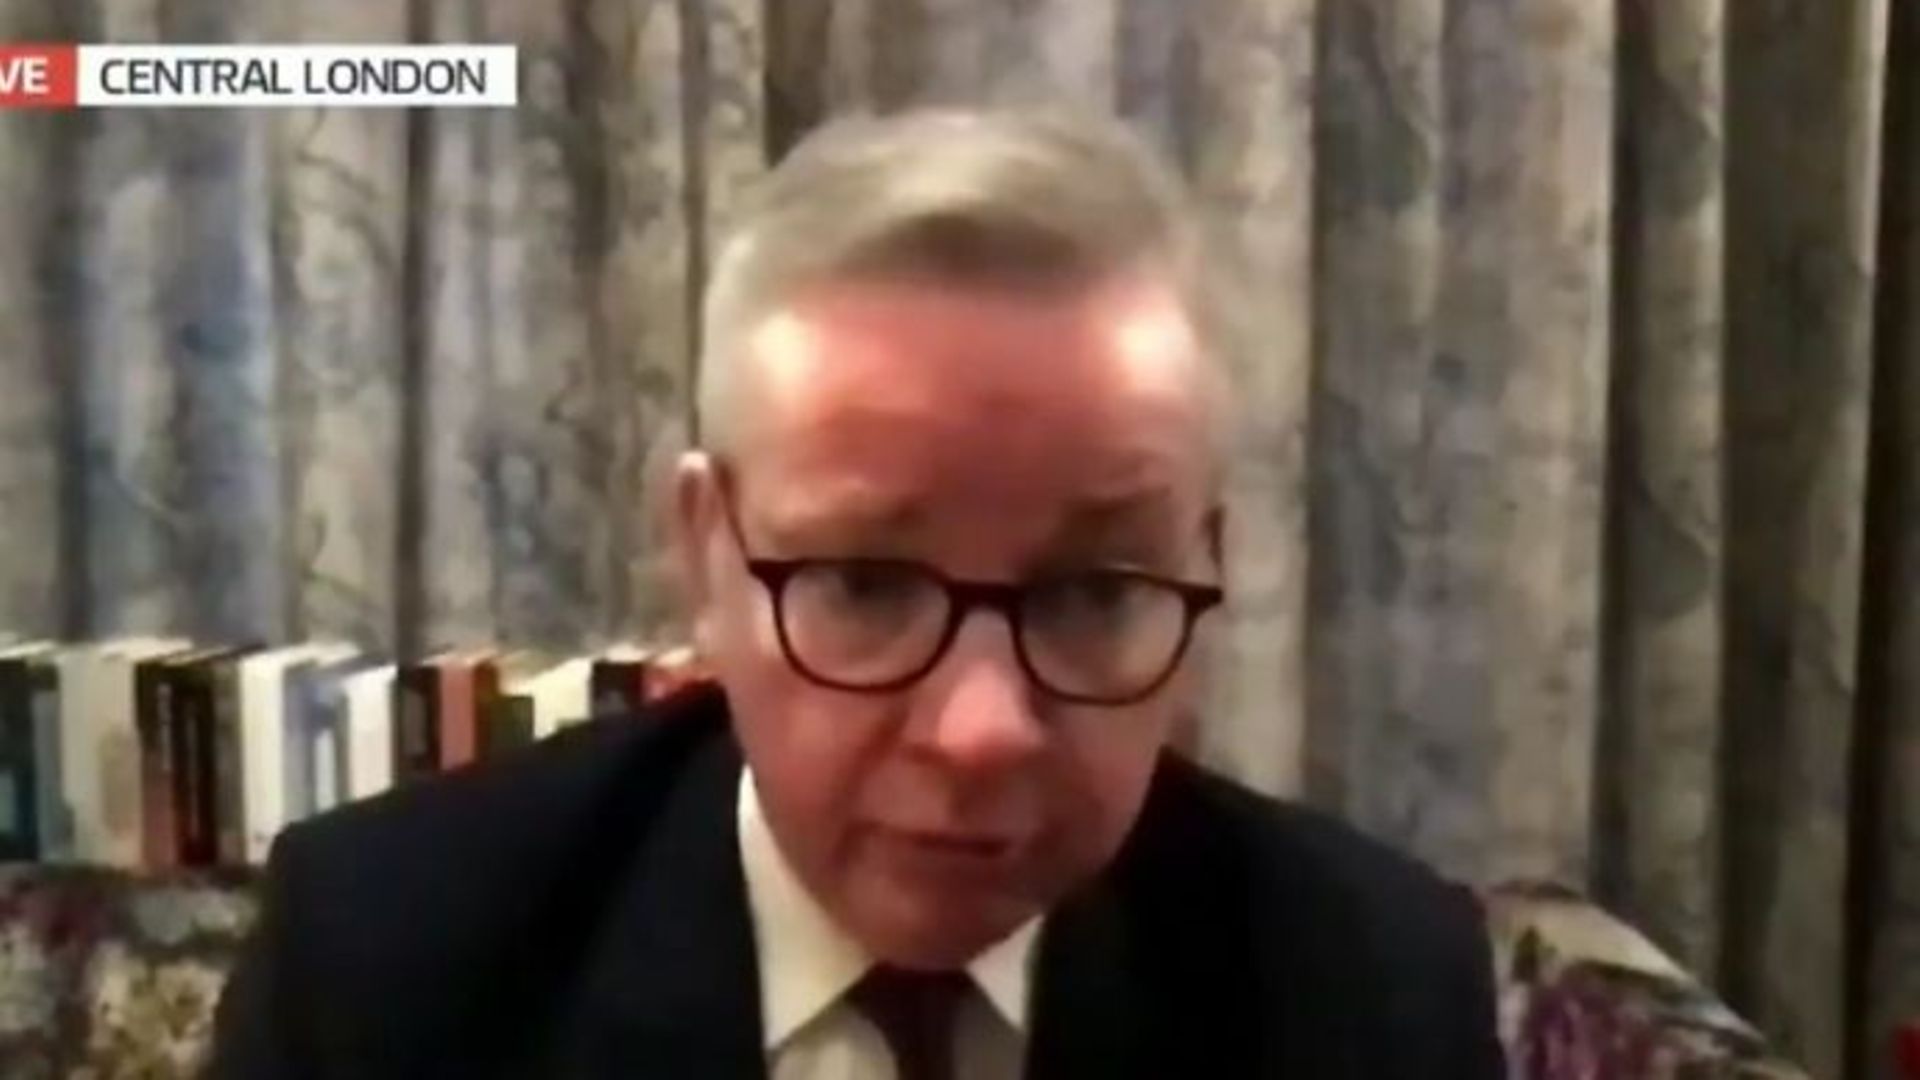 Michael Gove on Good Morning Britain - Credit: Twitter, GMB